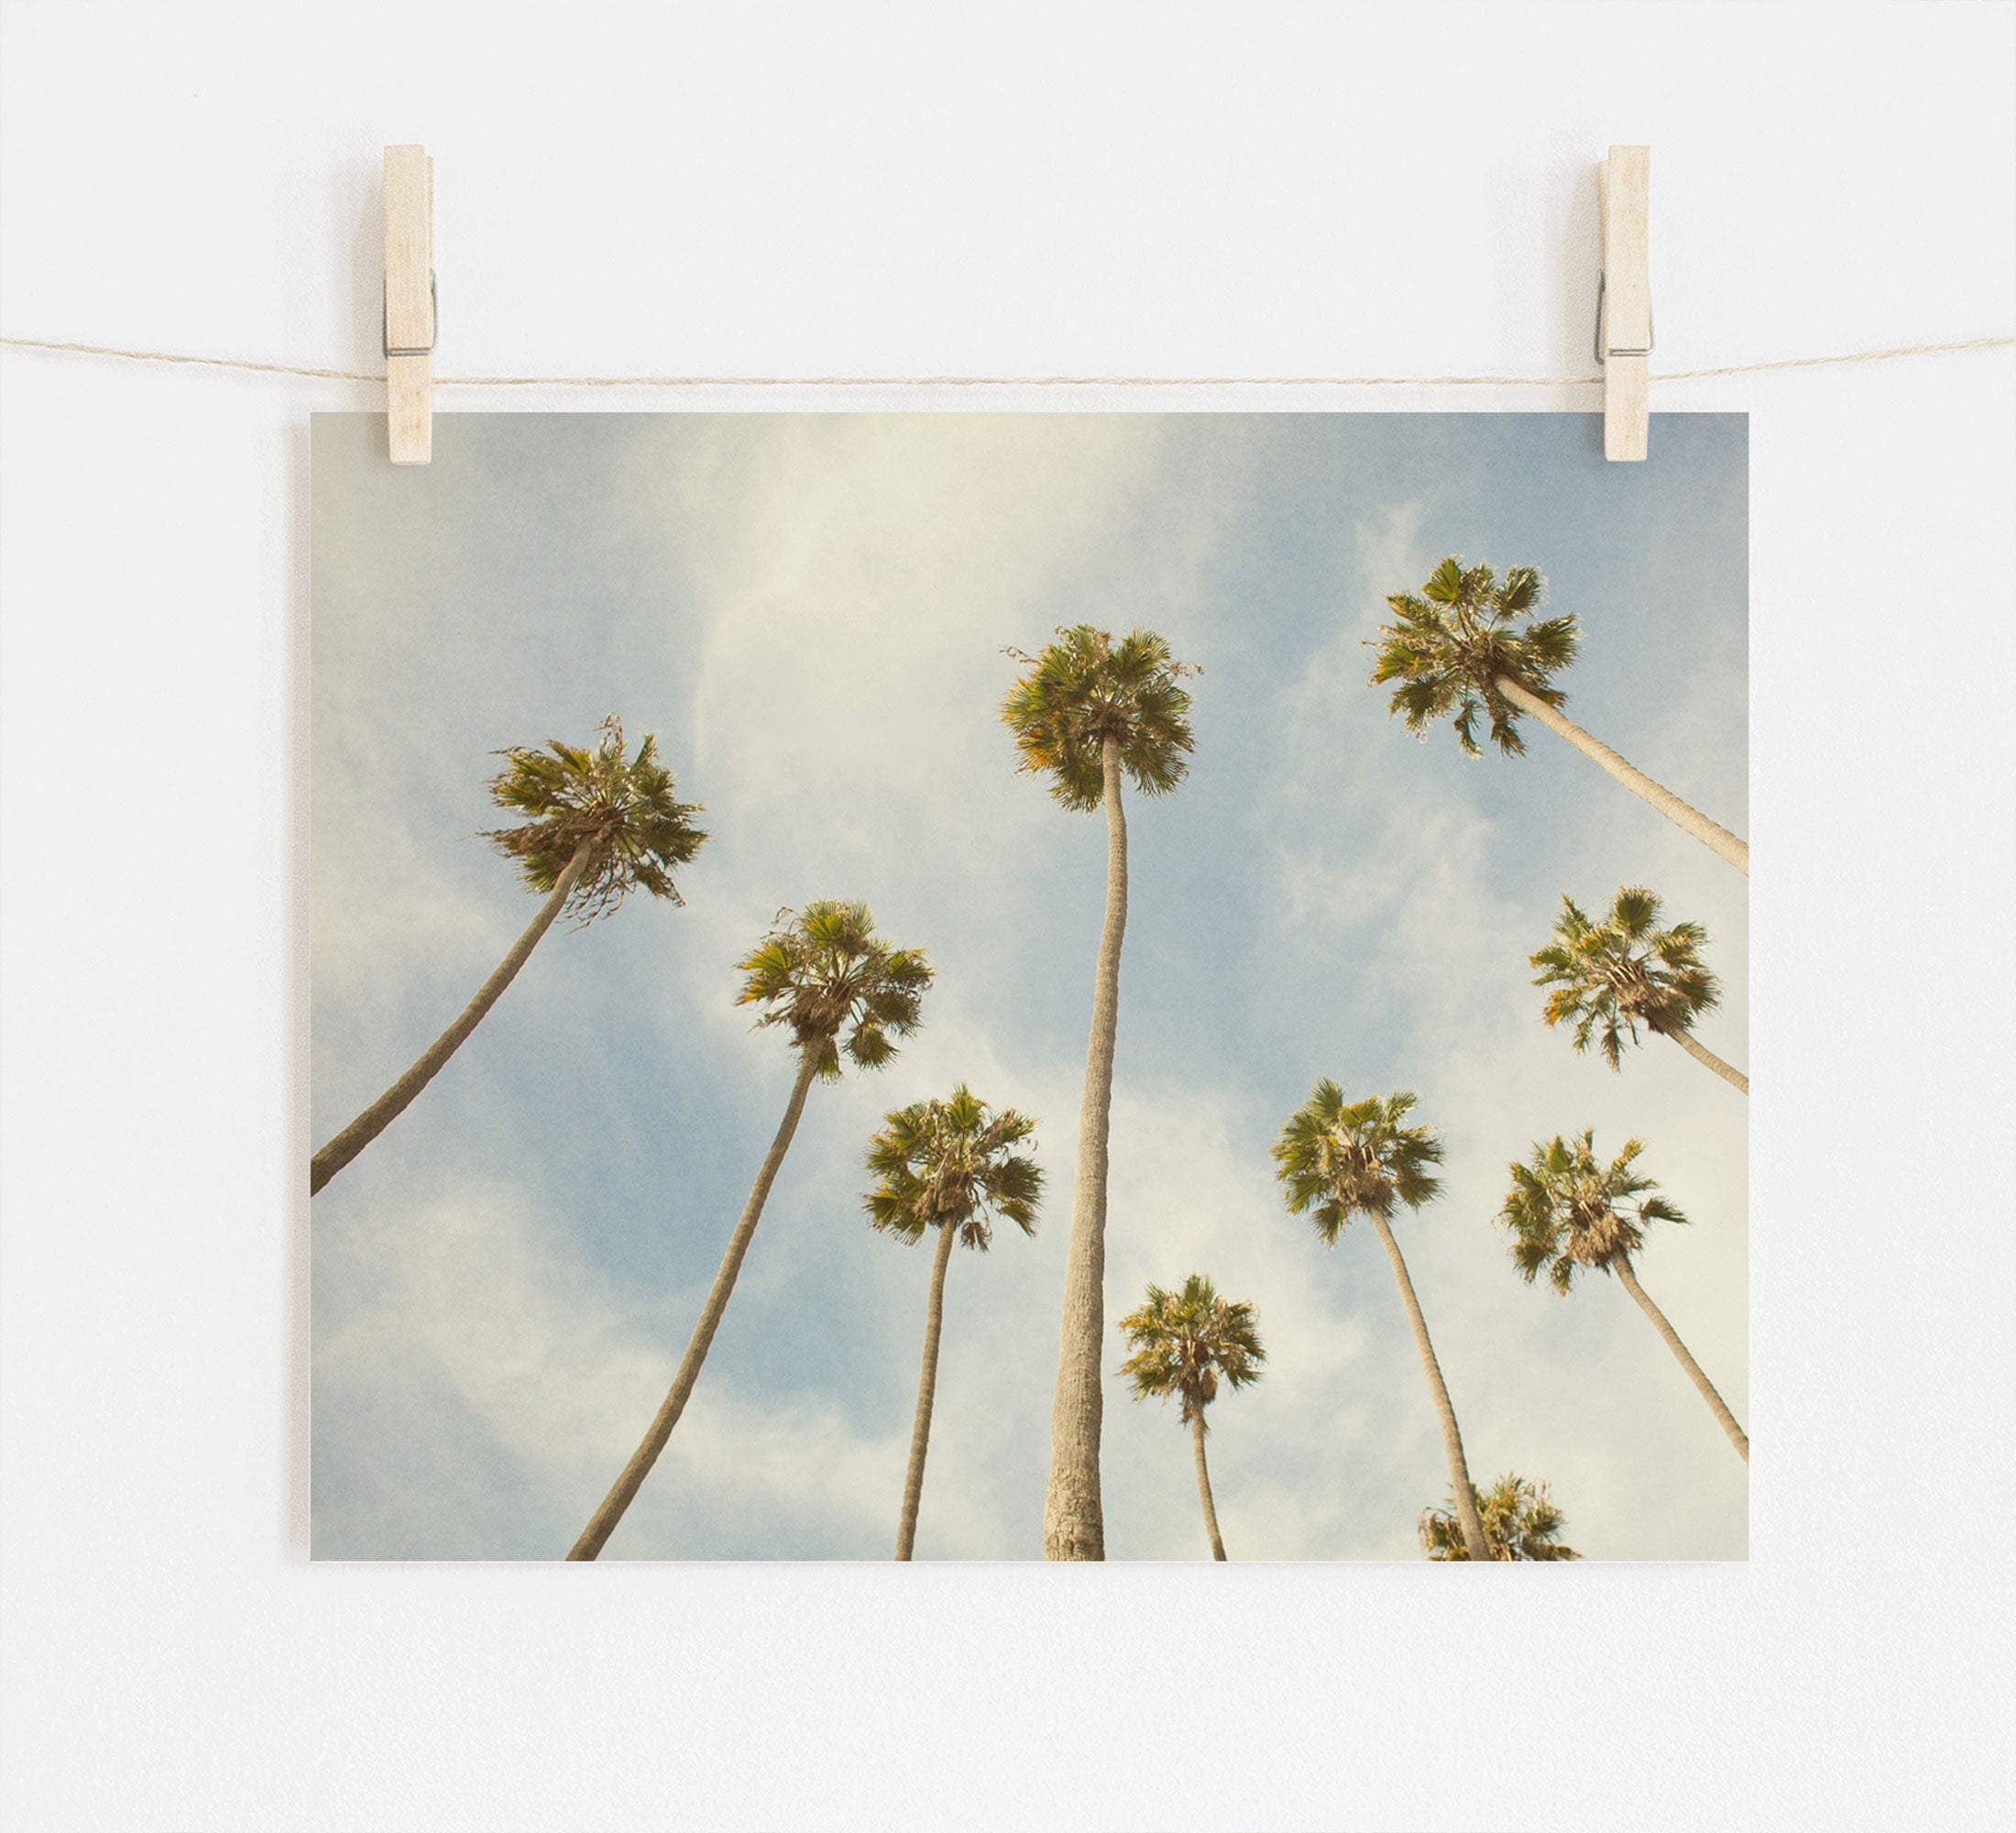 A photograph of tall California palm trees from a low angle view, pinned to a white wall with wooden clothespins, against a serene blue sky with light clouds - Offley Green's Palm Tree Print, California Beach Scene 'Reach for the Palms'.